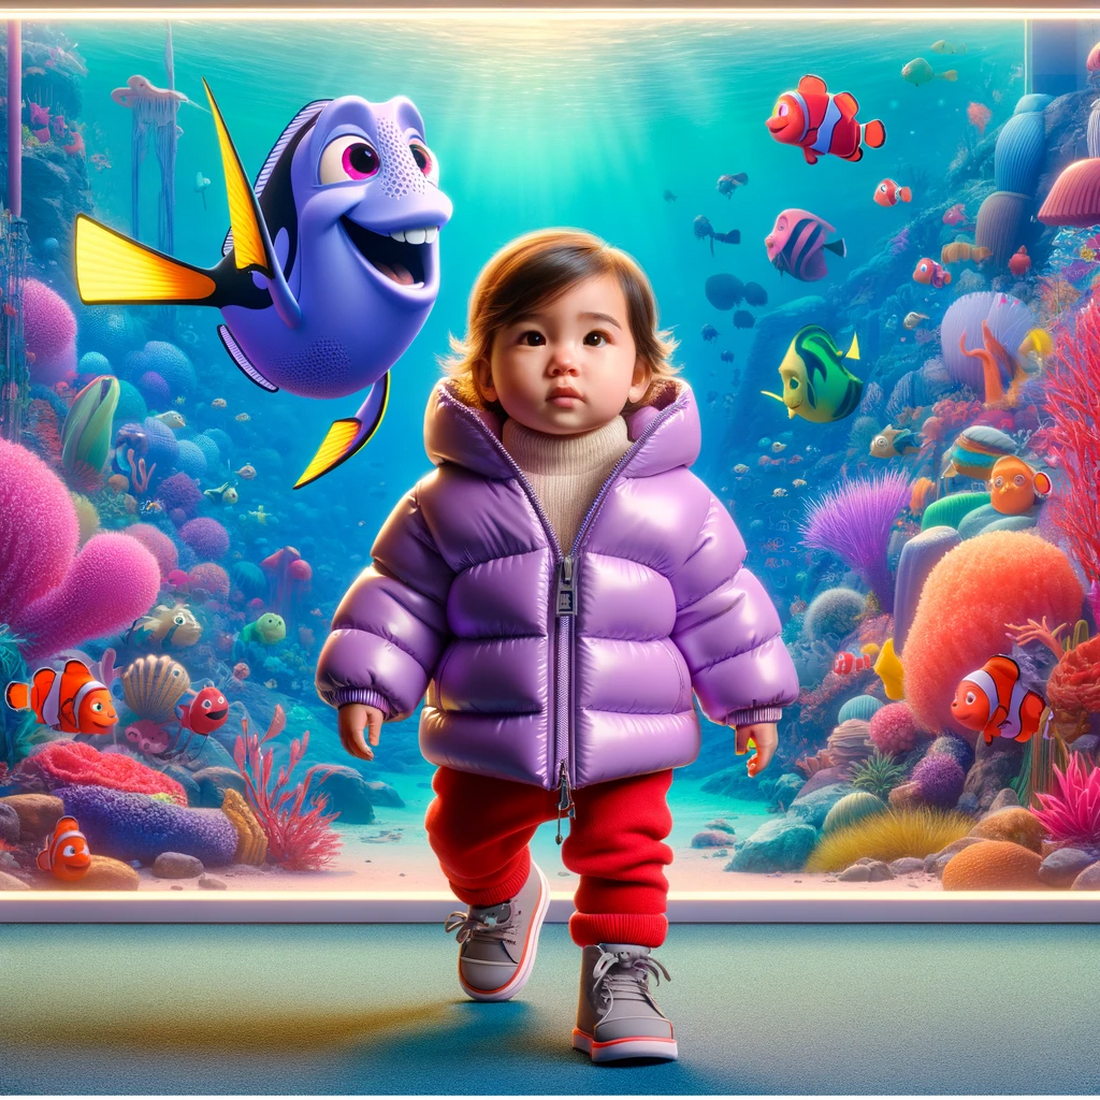 AI art of a young girl with a purple puffy coat walking in an aquarium, in a cartoon style